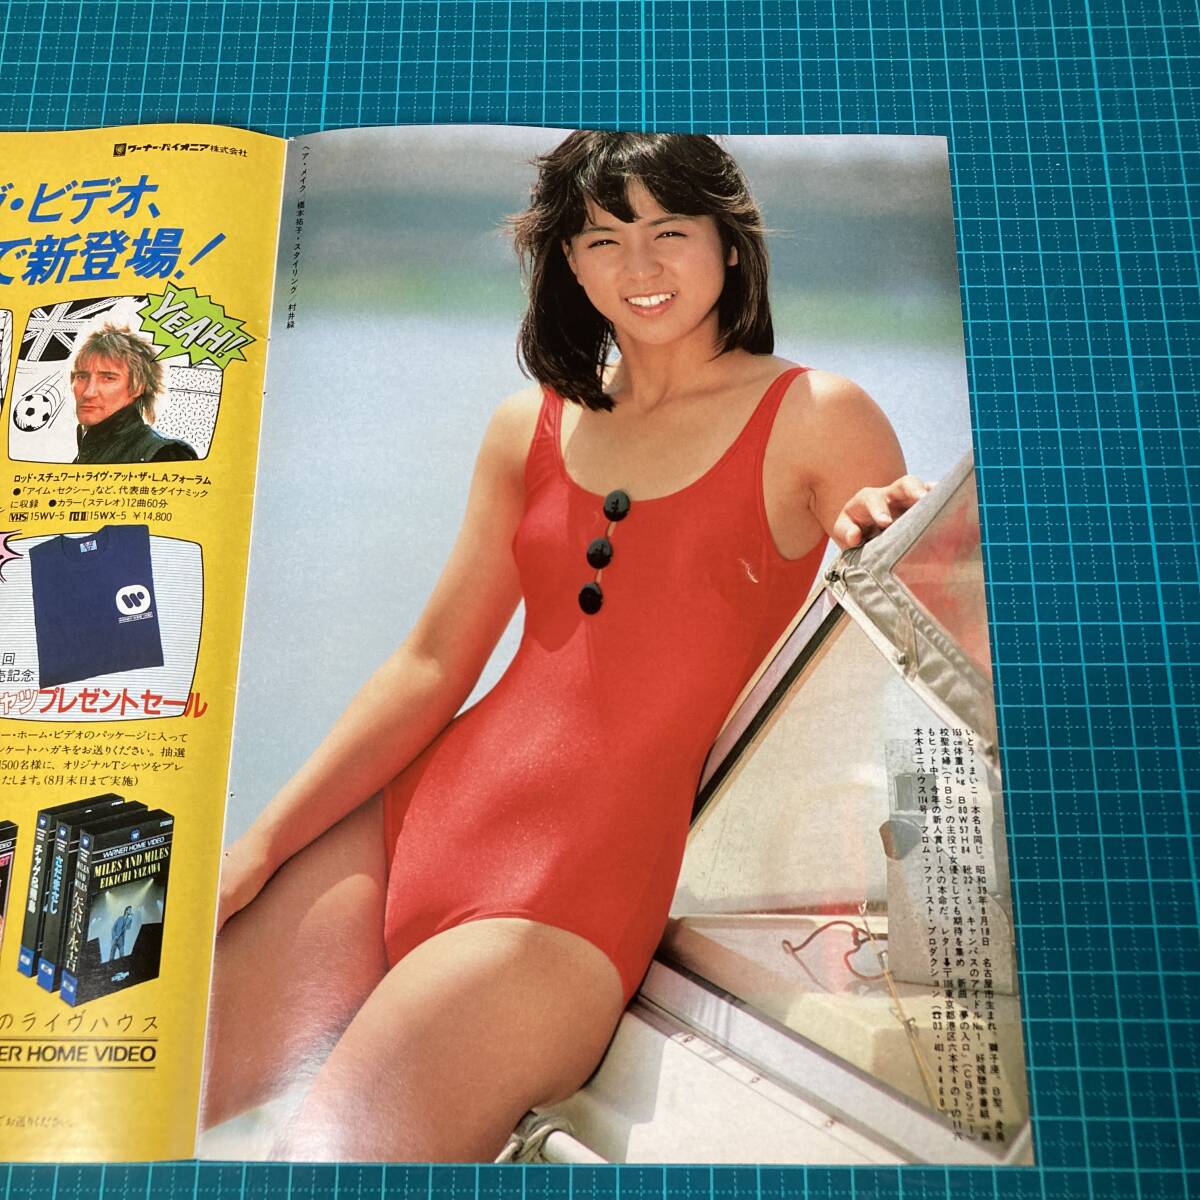  Showa Retro Ito Maiko scraps gravure swimsuit 4 page that time thing stapler is .. only 